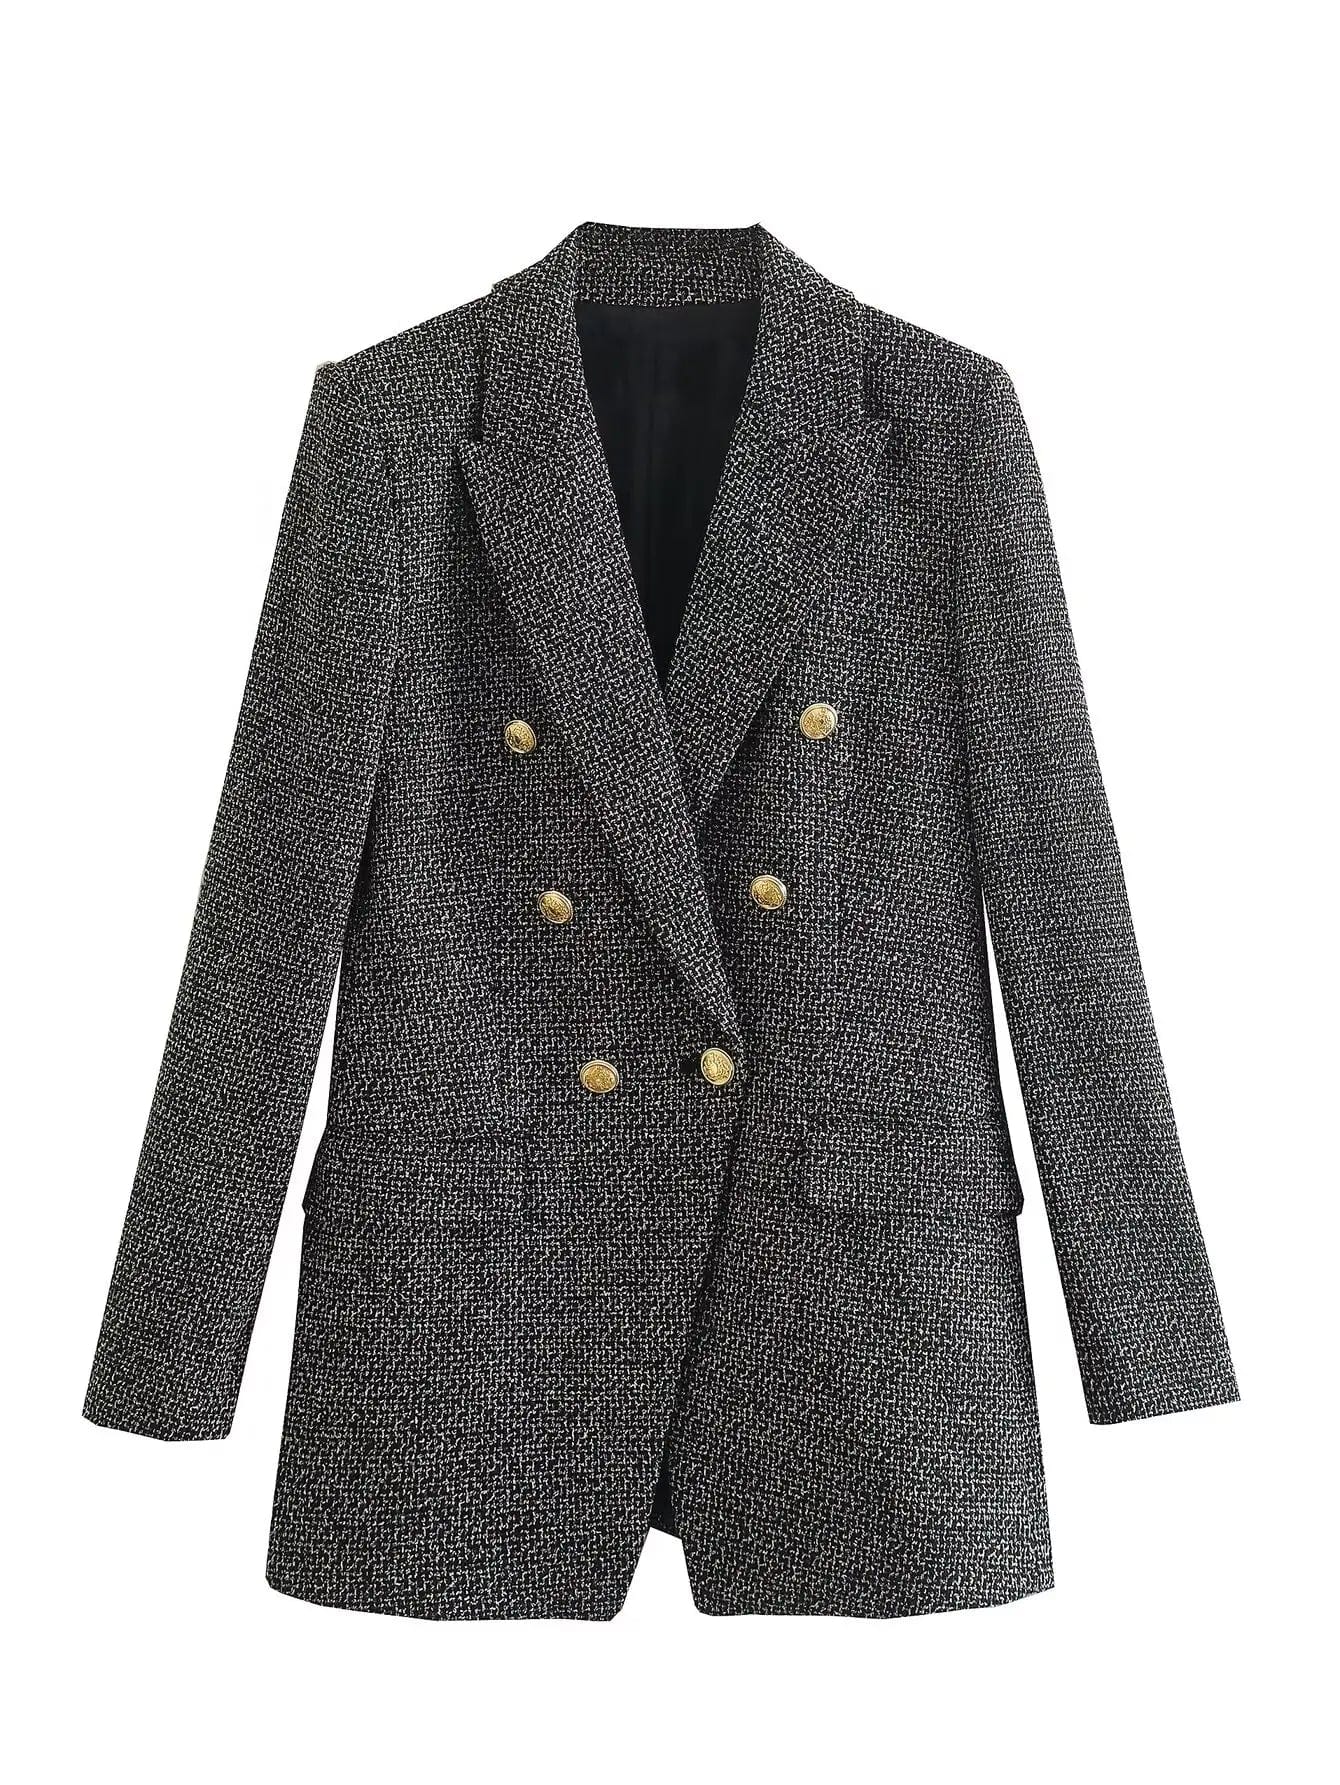 Women's Clothing Suit Gray Blended Floral Wool Double-Breasted Suit A Well-Fitted Commuter Suit Quality Jacket Coat